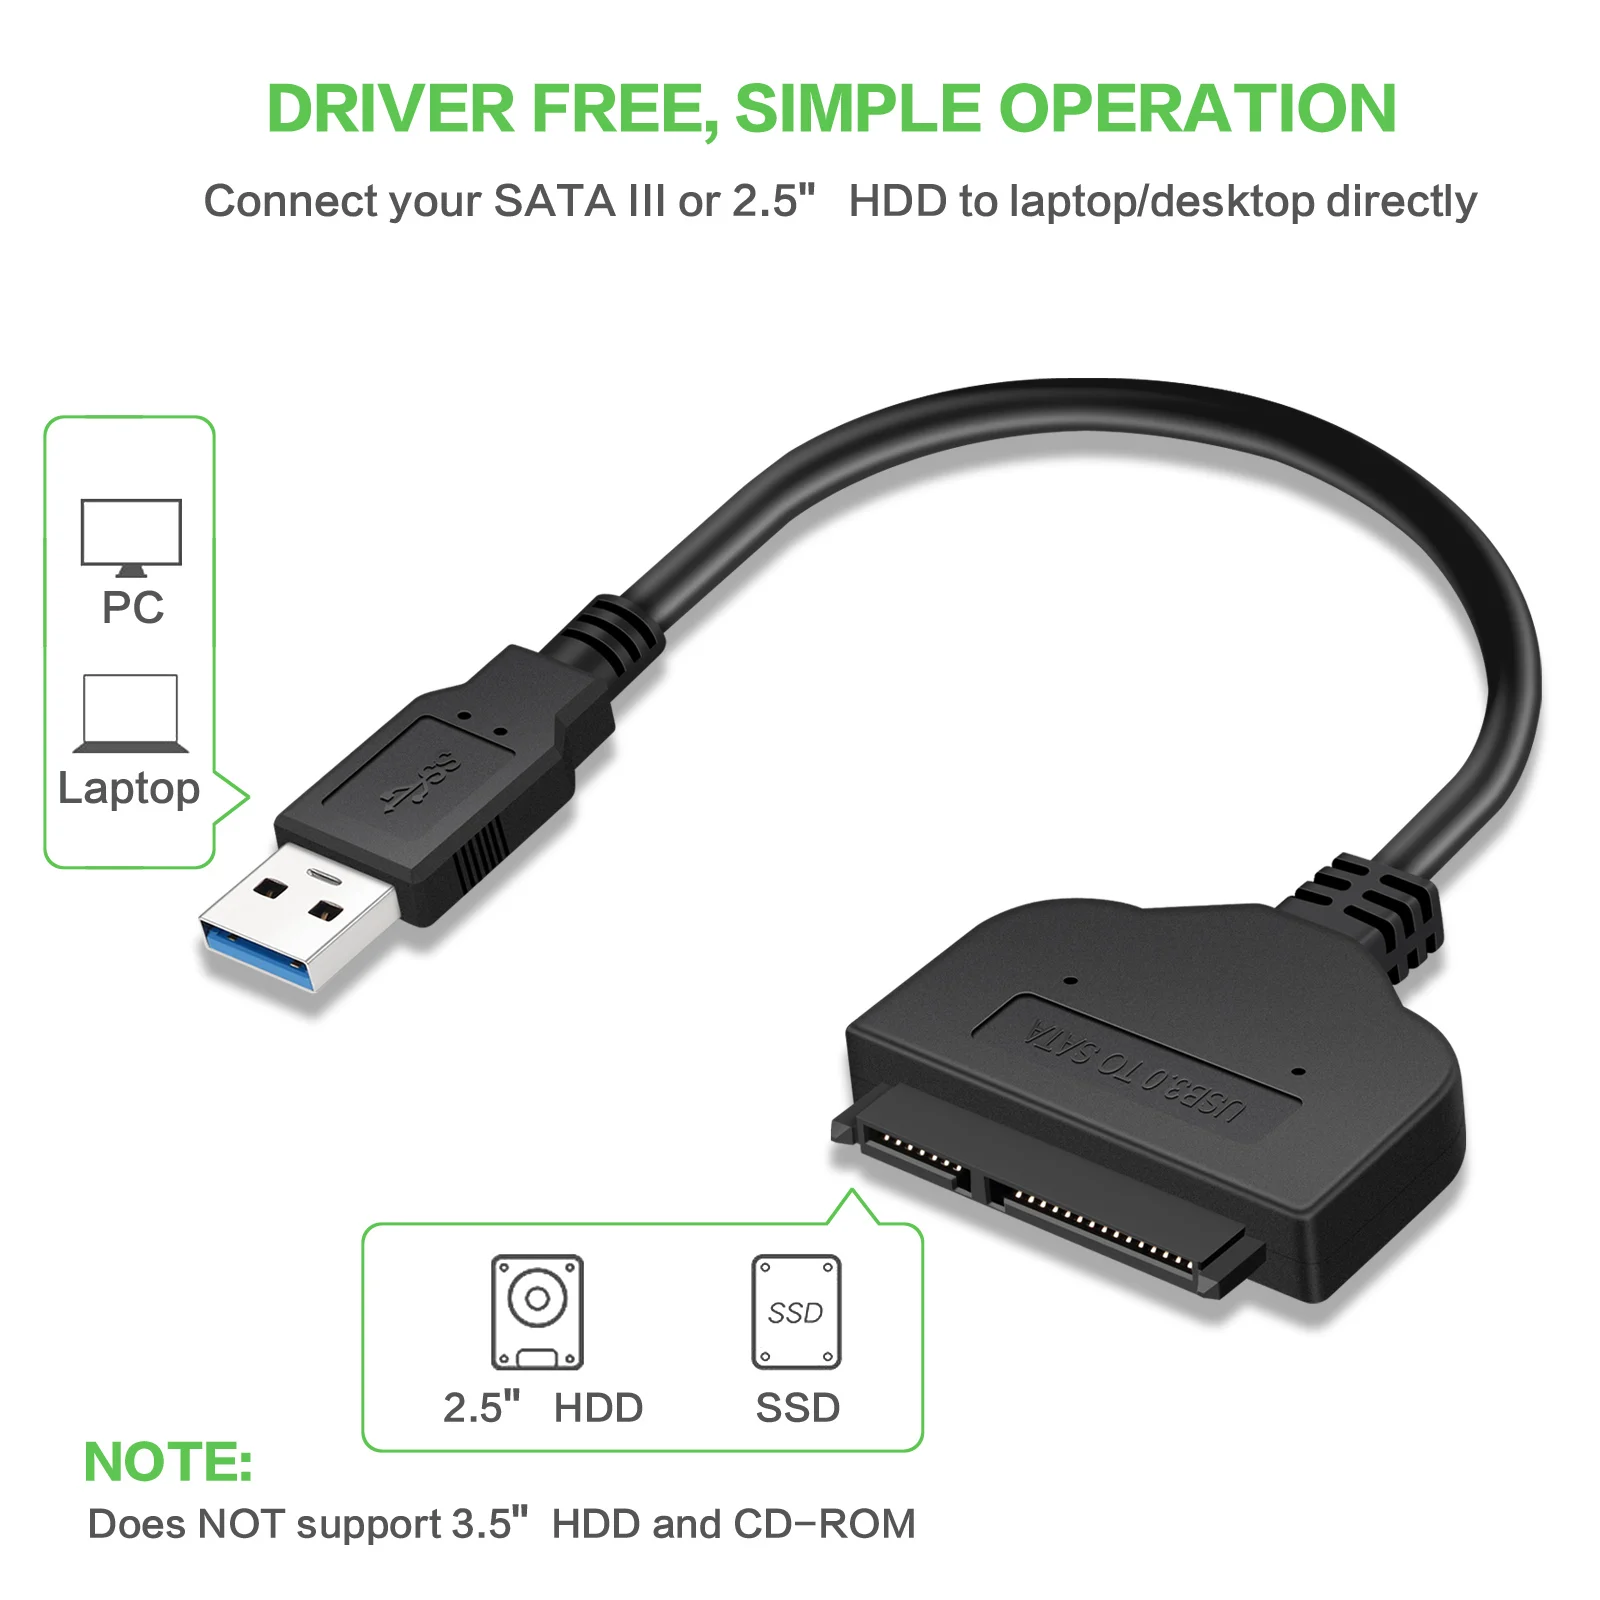 

USB 3.0 to 2.5” SATA III Hard Drive Adapter SATA to USB3.0 PC External Converter for 2.5 inch SSD&HDD Data Transfer Support UASP